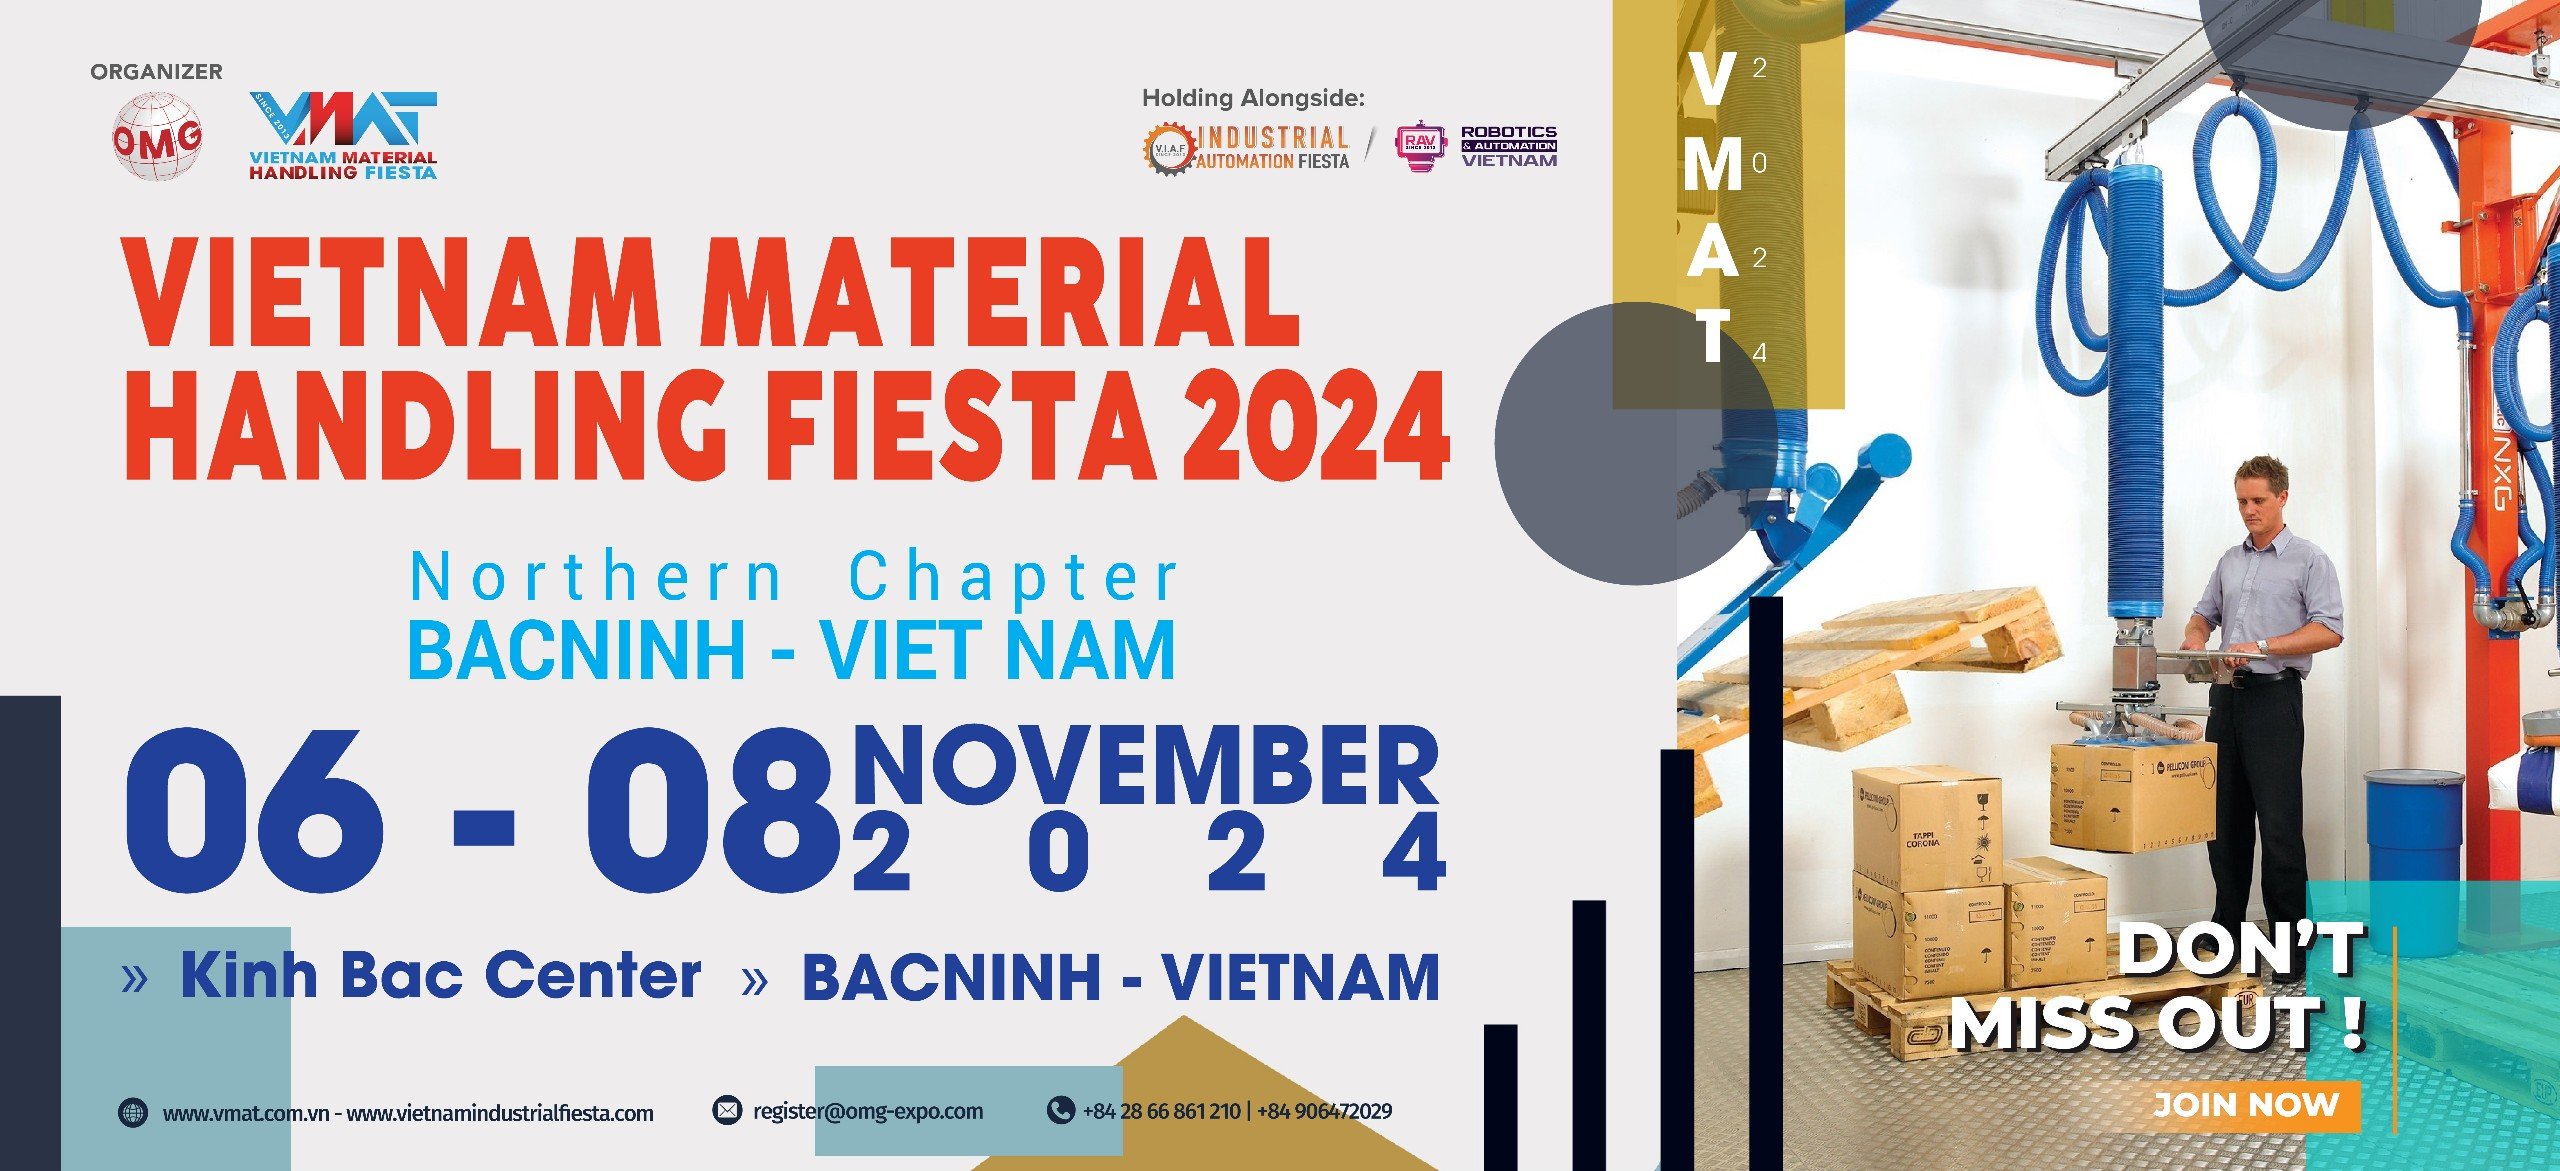 VMAT 2024 - Northern Chapter